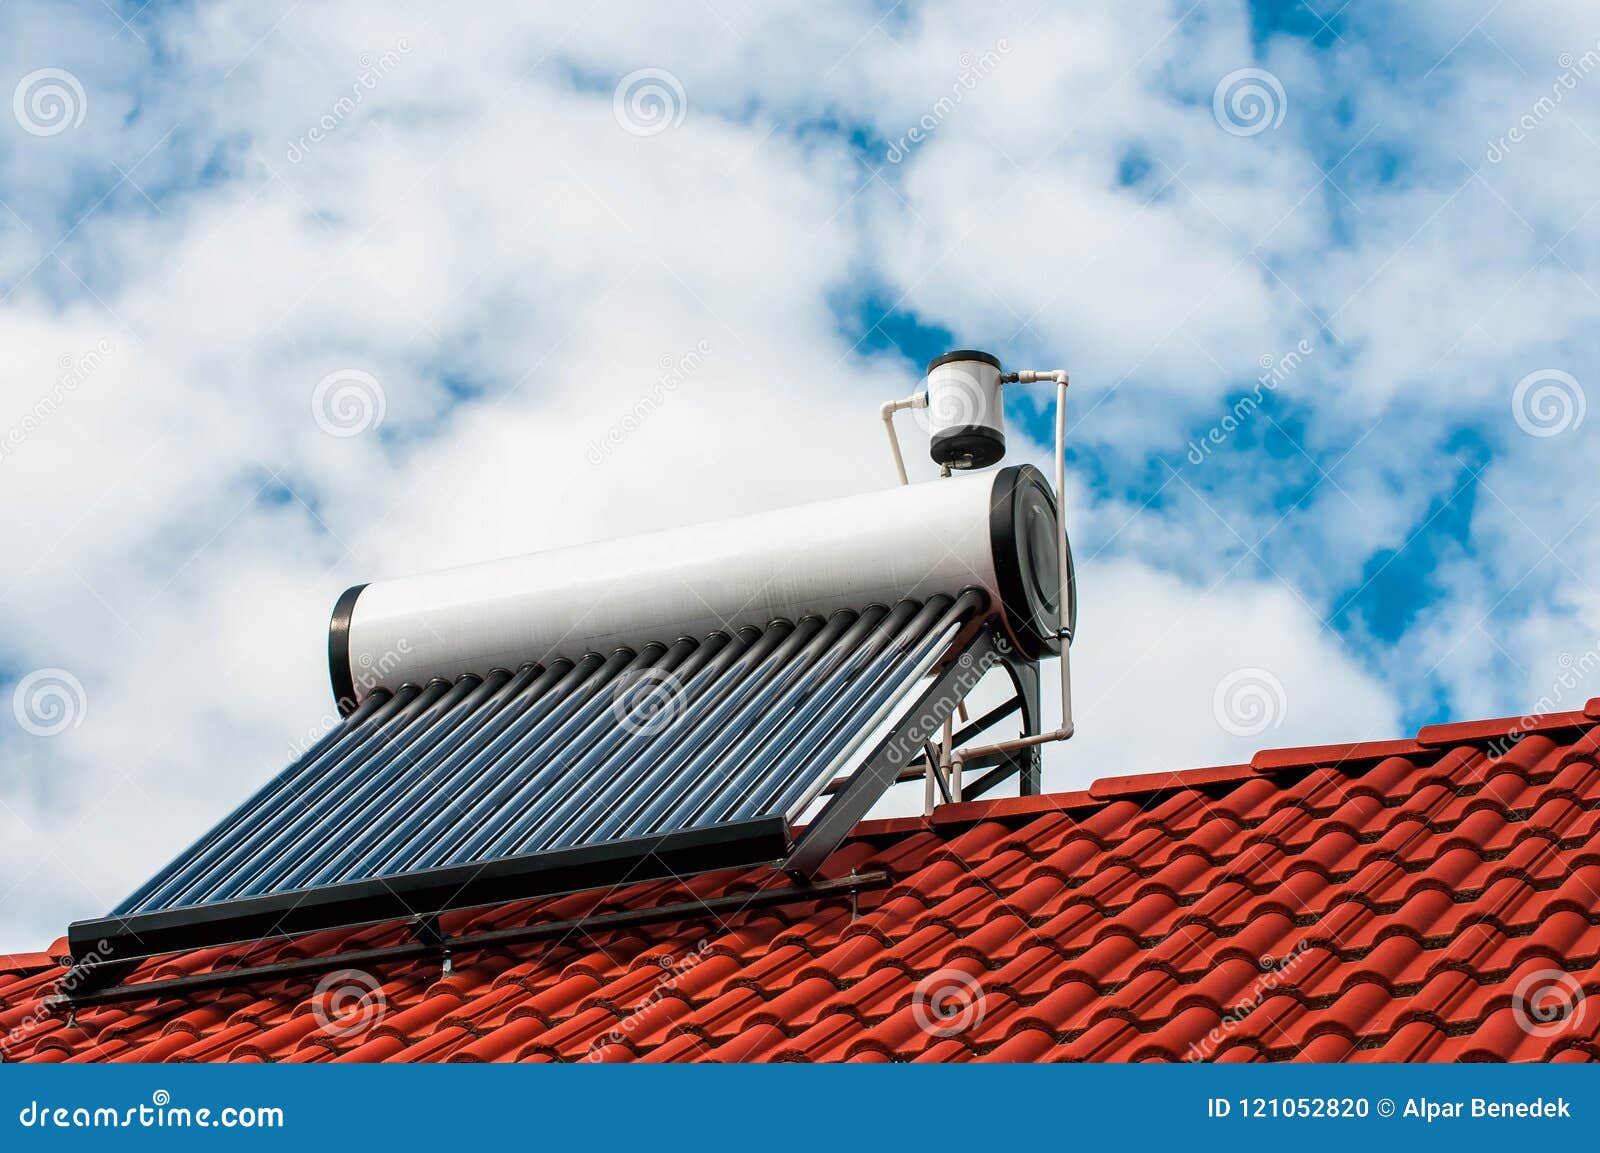 Solar Water Heater Boiler On Residentual House Rooftop Stock Photo